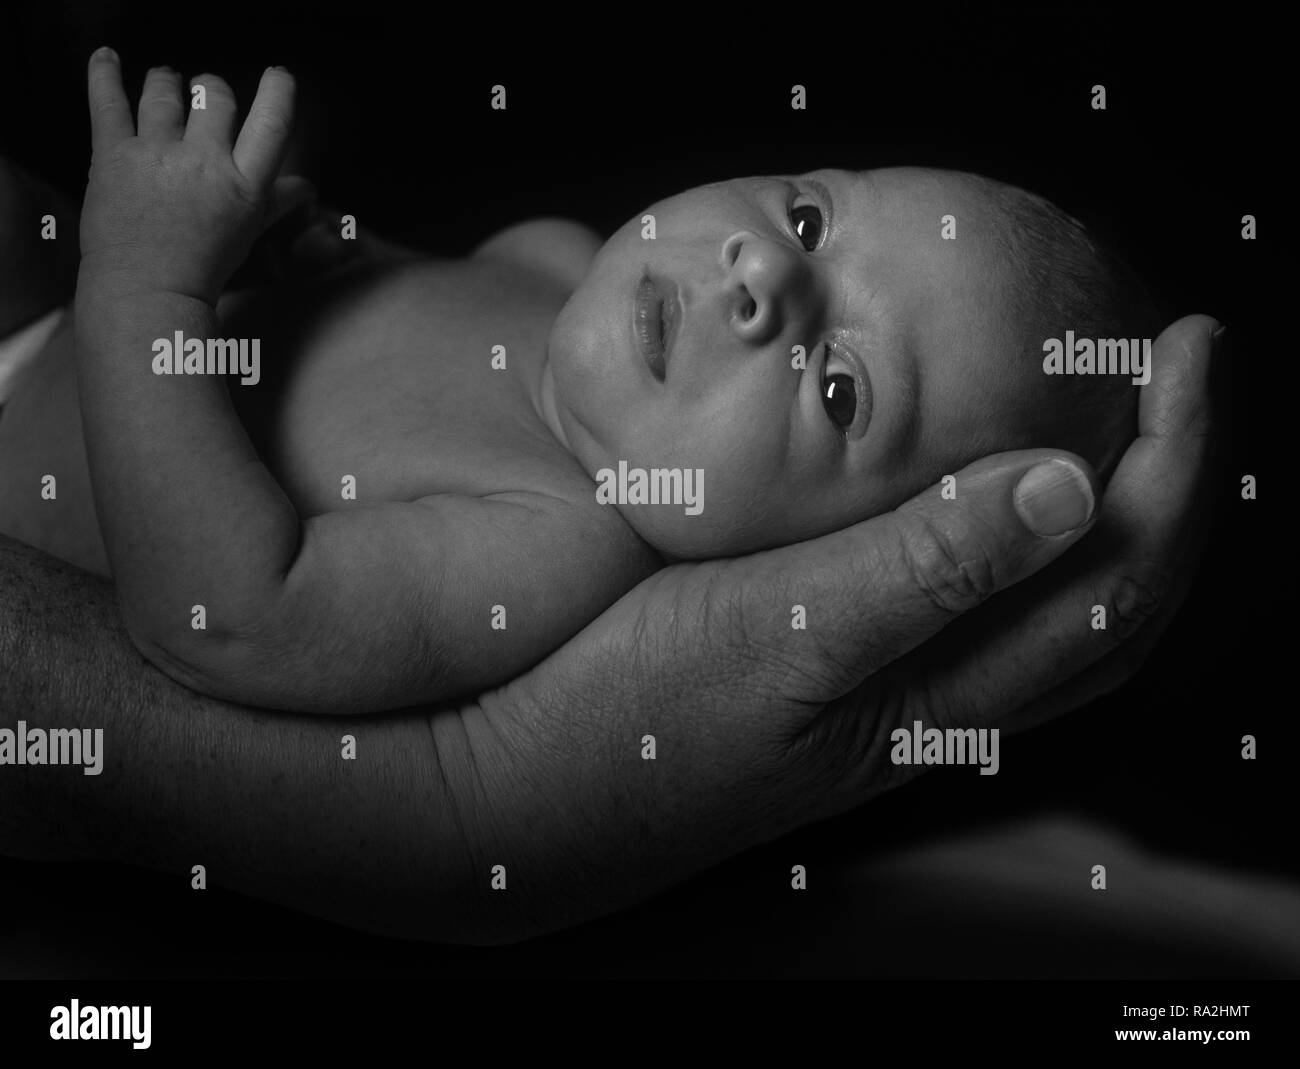 Newborn in the grasp of very large hands staring at the camera Stock Photo